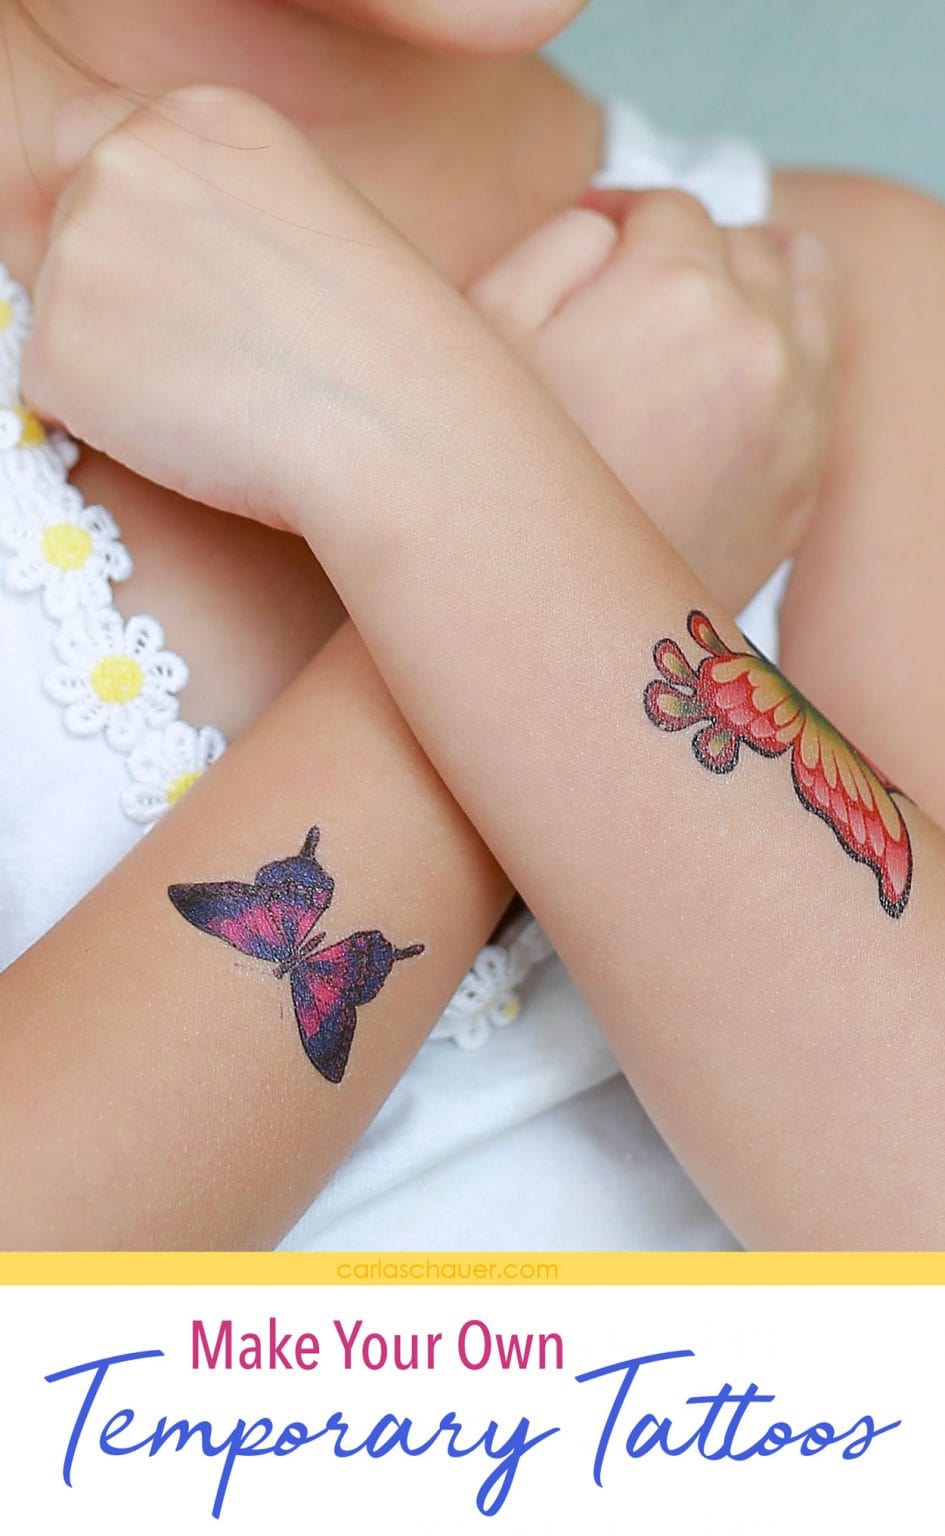 how-to-make-your-own-temporary-tattoos-carla-schauer-designs